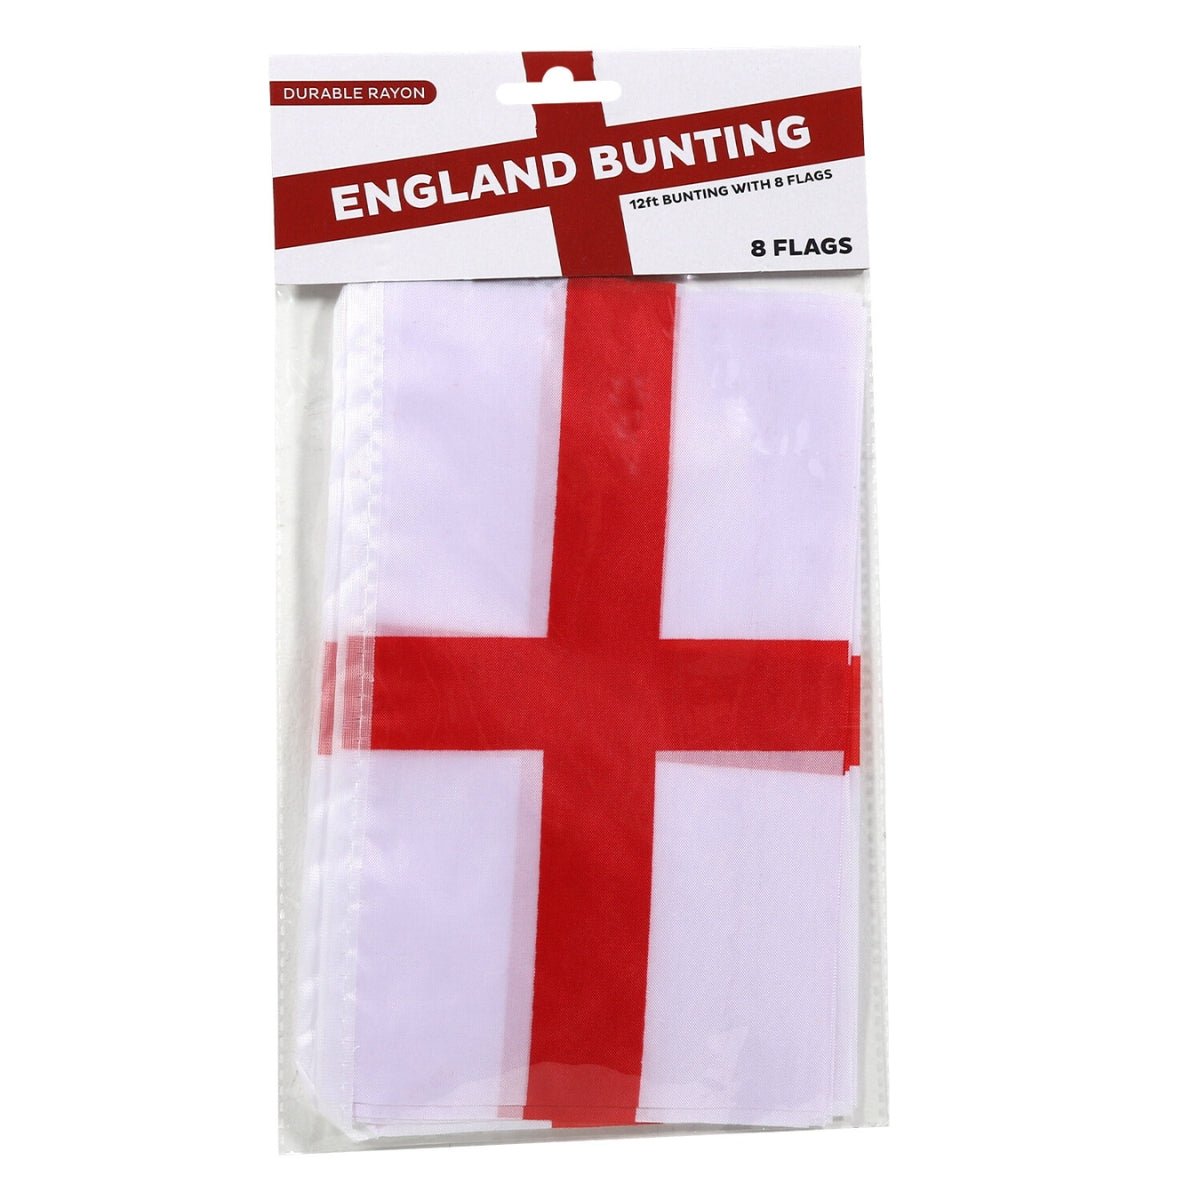 England Bunting 12ft with 8 Flags - Kids Party Craft